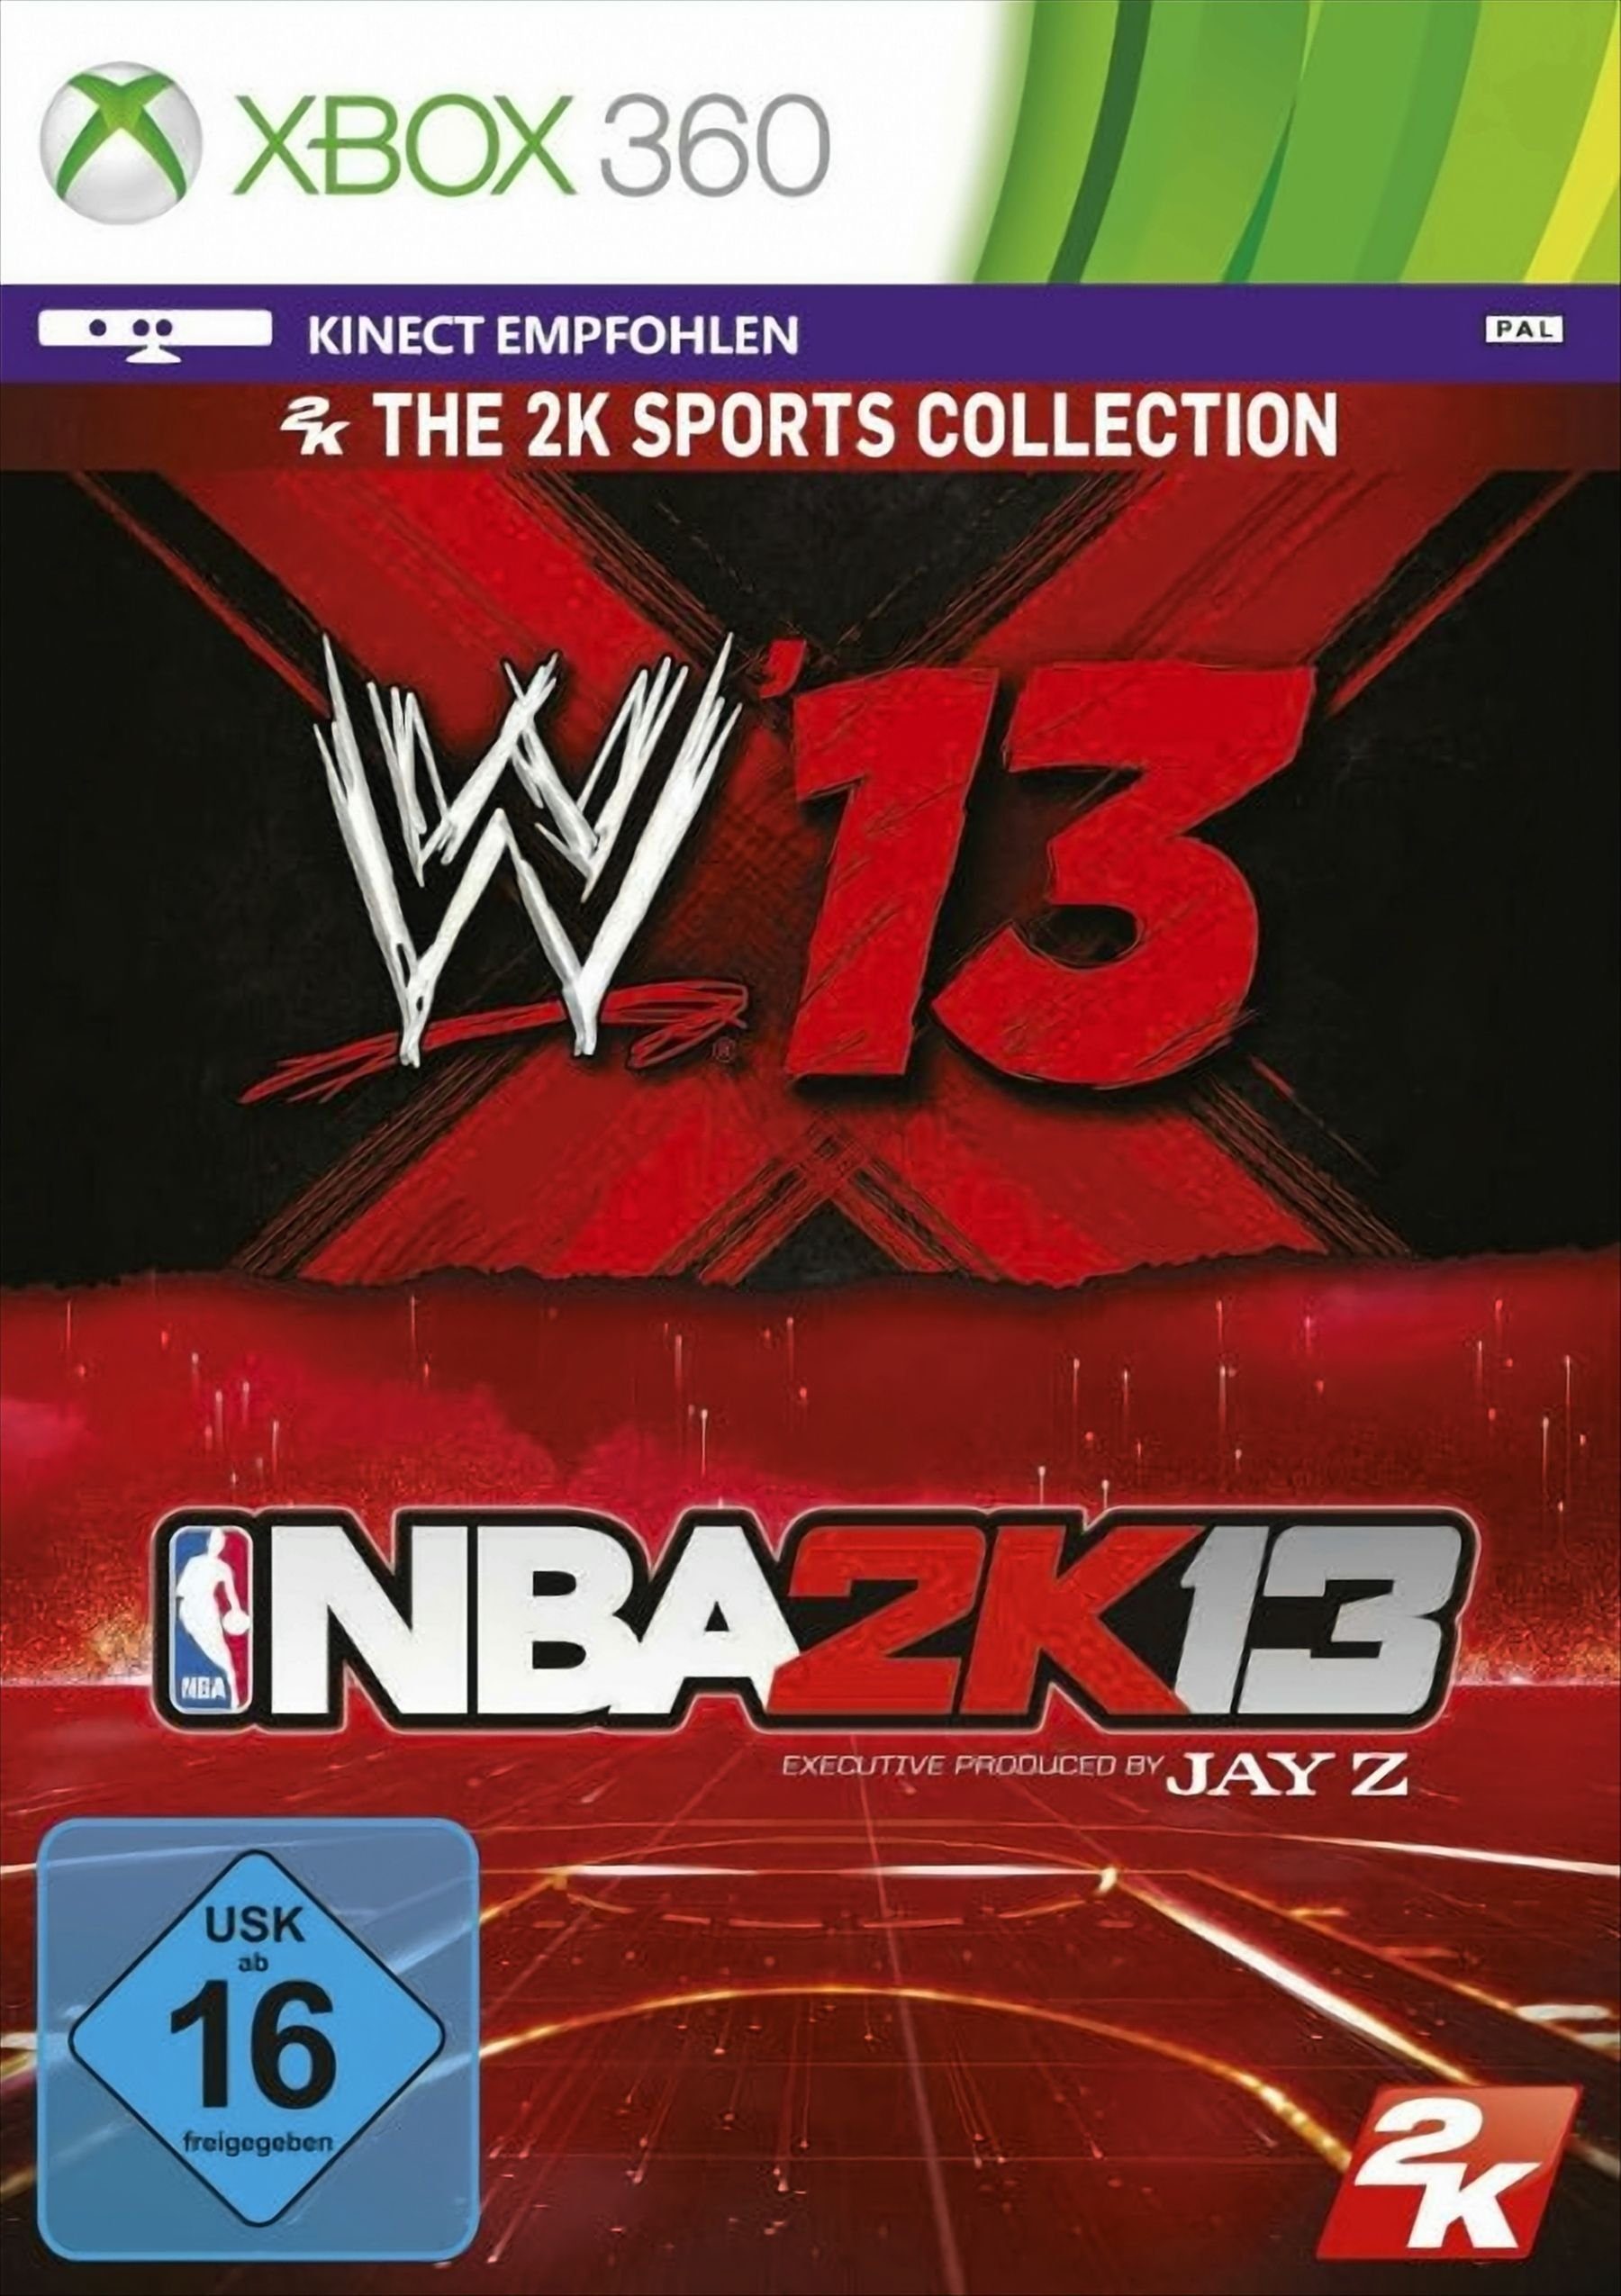 The 2K Sports Collection (NBA 2K13 / WWE 13) Xbox 360